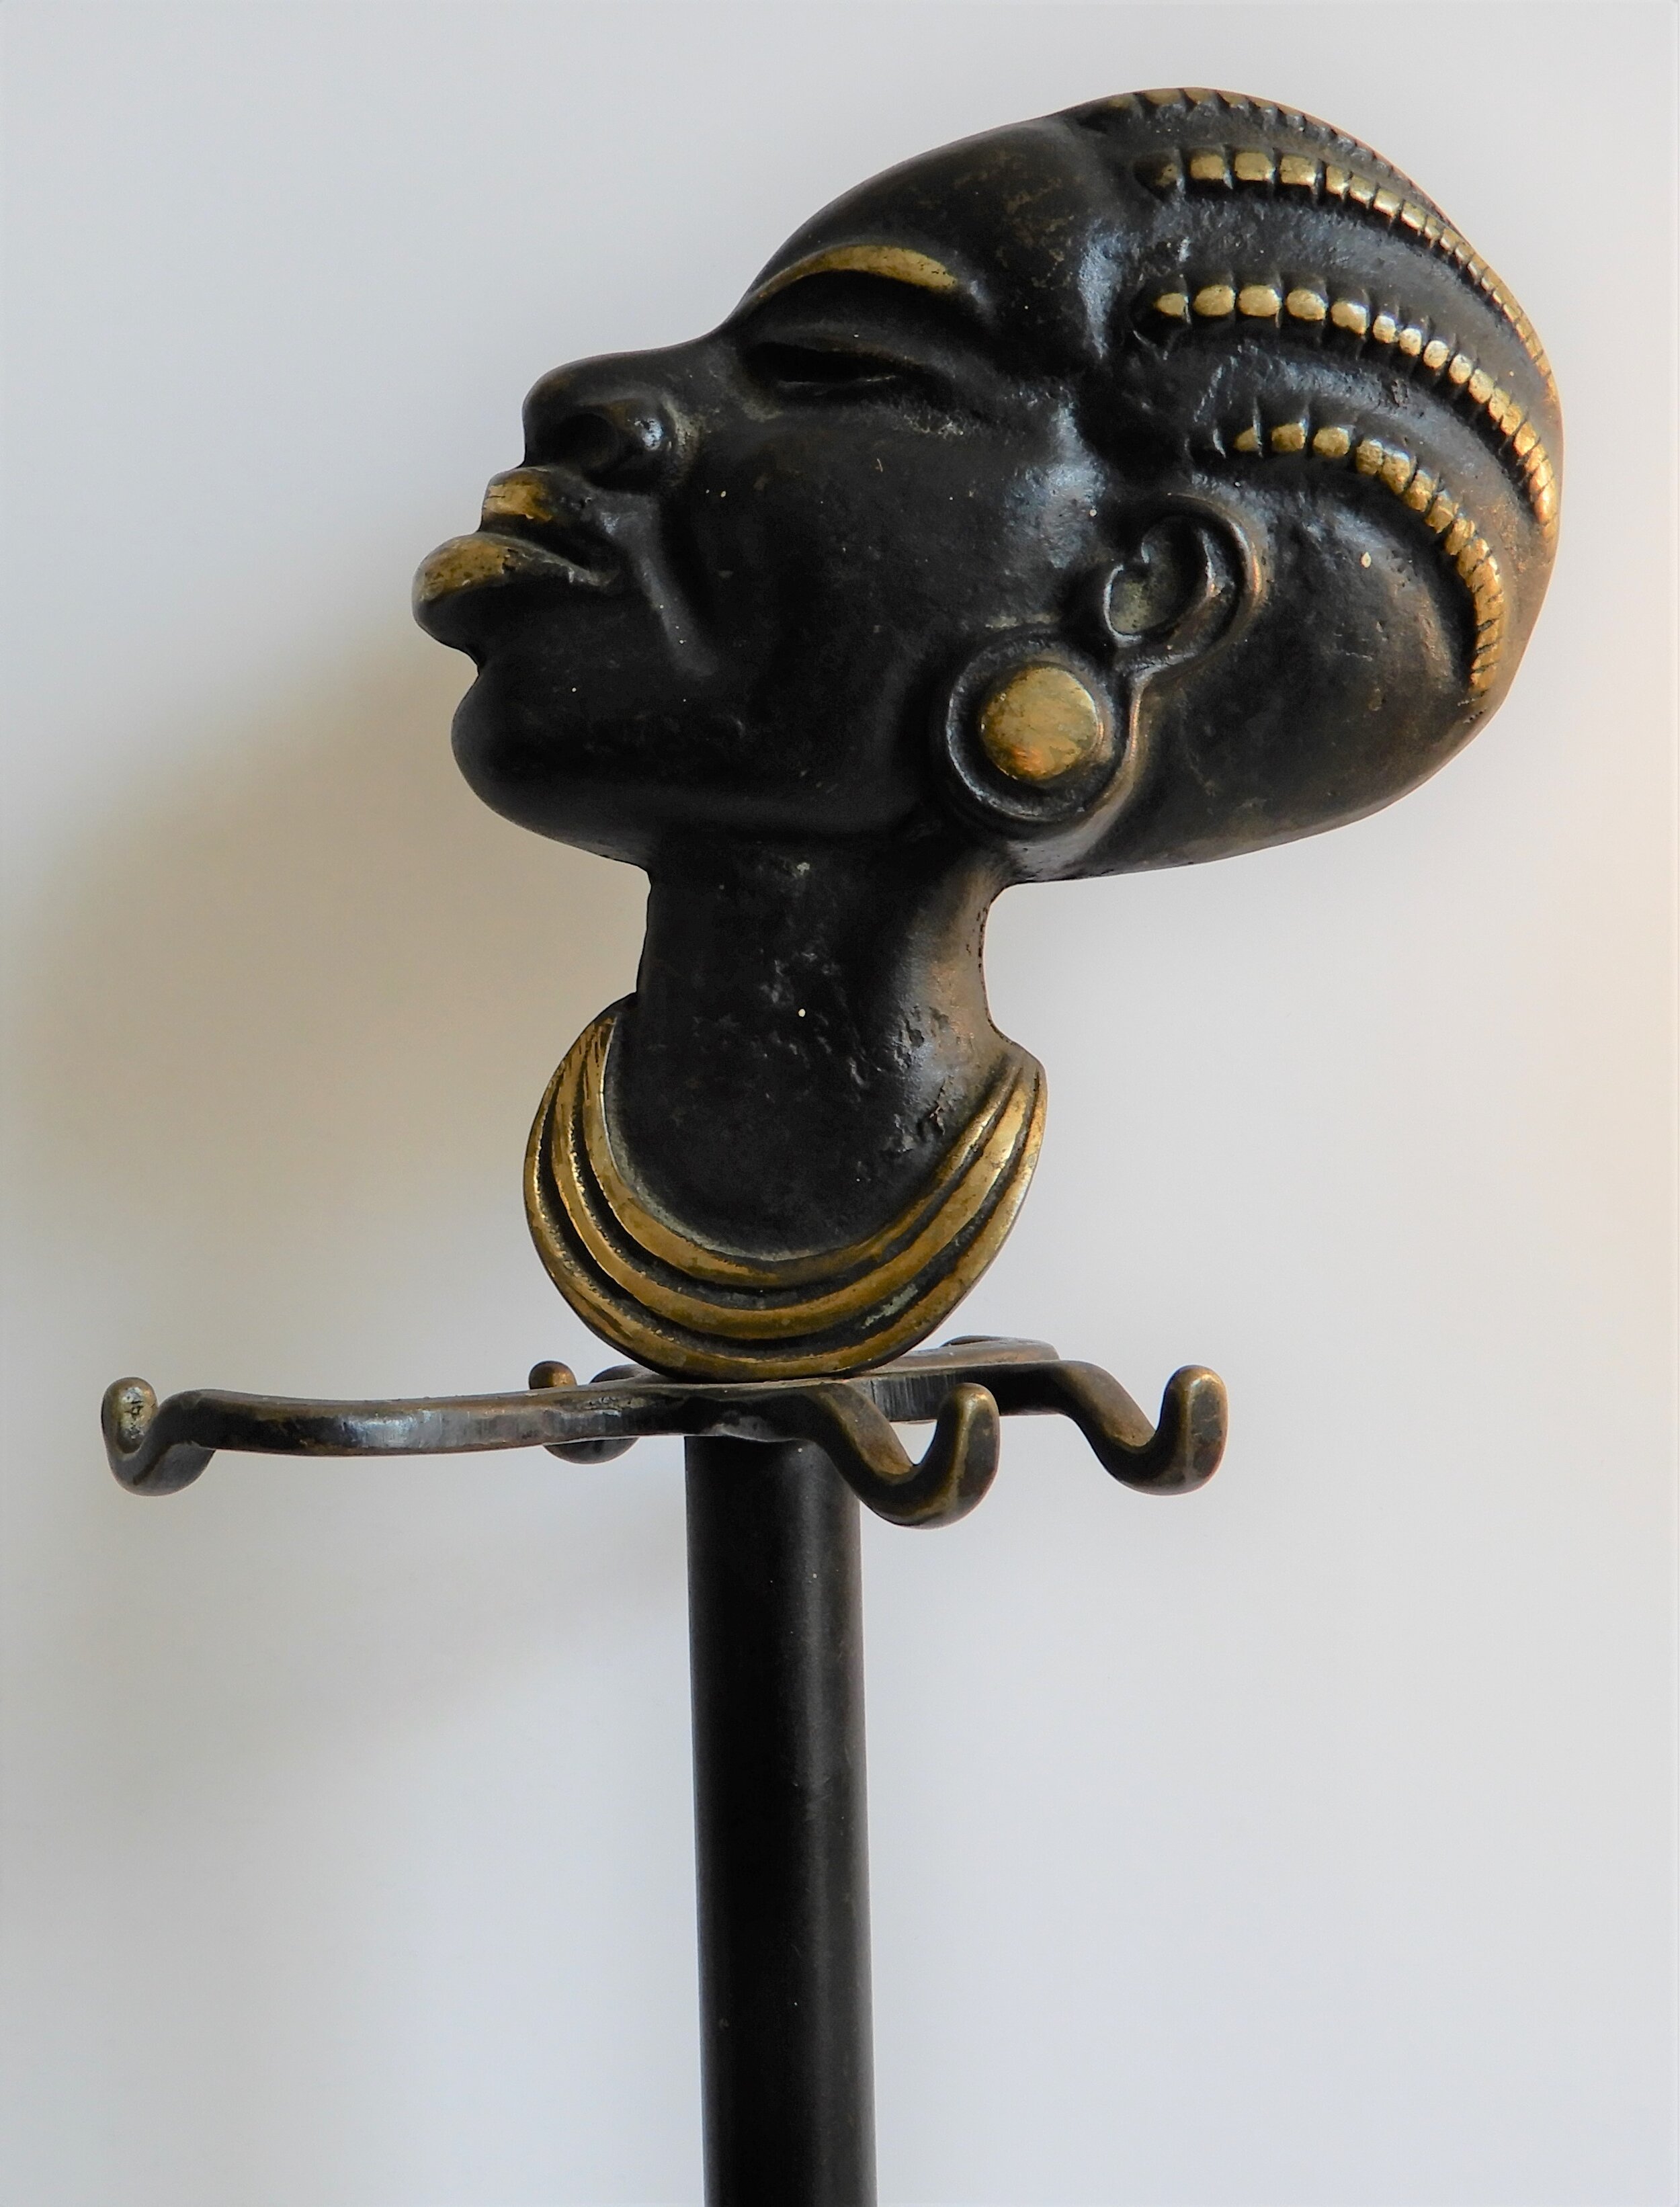  A black fire iron set holder the top of the stand are four hooks, three at the front and one at the back. At the top there is a sculpture of a Black woman in profile. Her fours braids, eyebrows, lips and necklace are painted gold. Her eyes are close